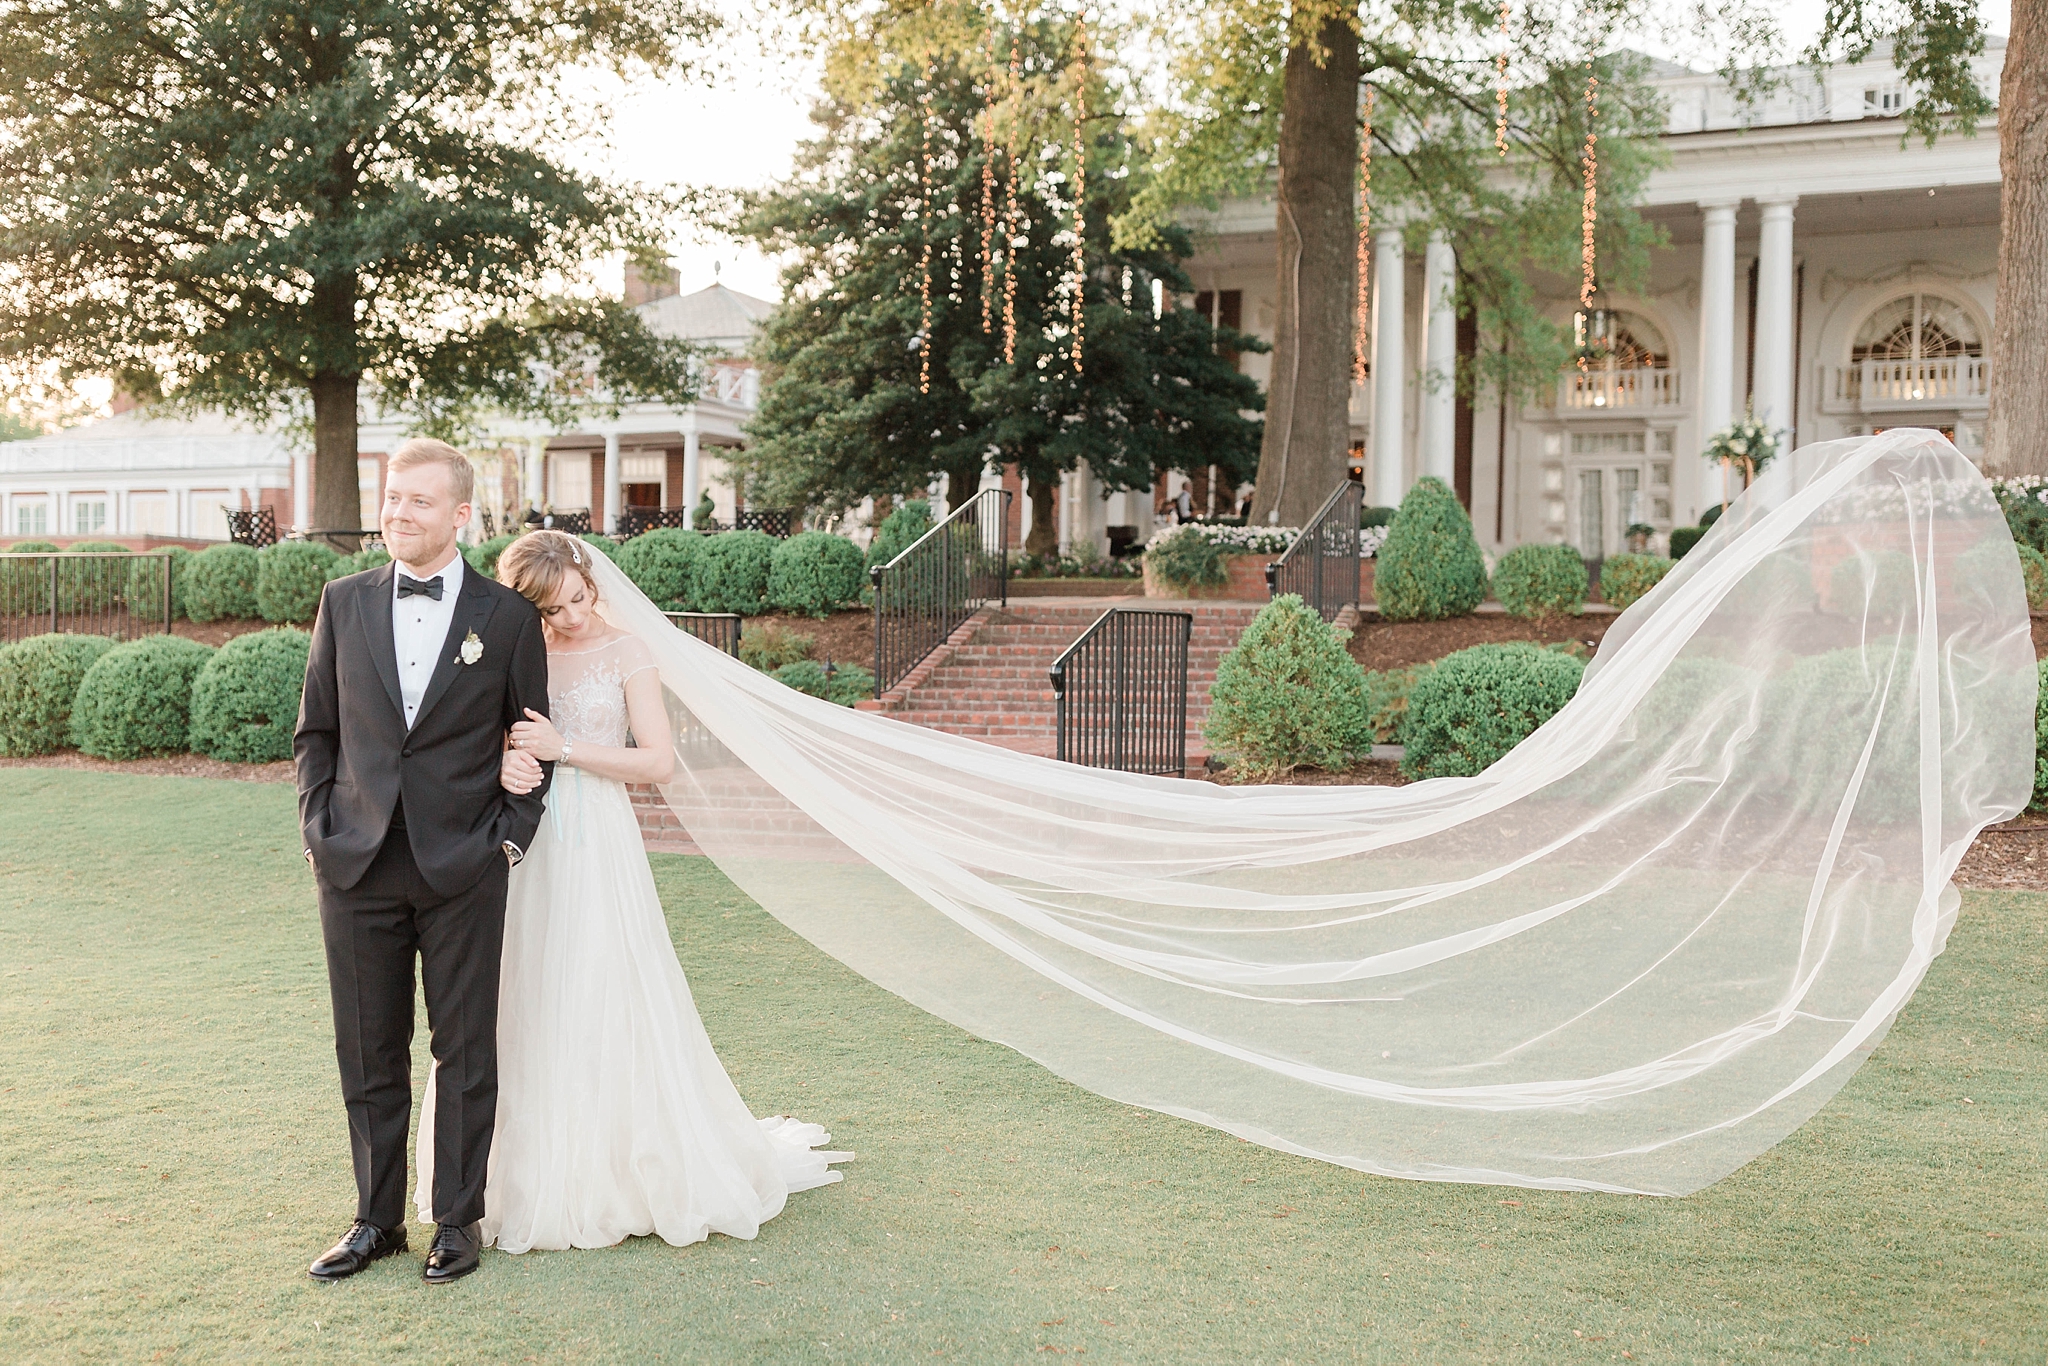 Sharing Part 2 of this incredible ballet inspired black tie wedding at the Country Club of Virginia in Richmond, VA.